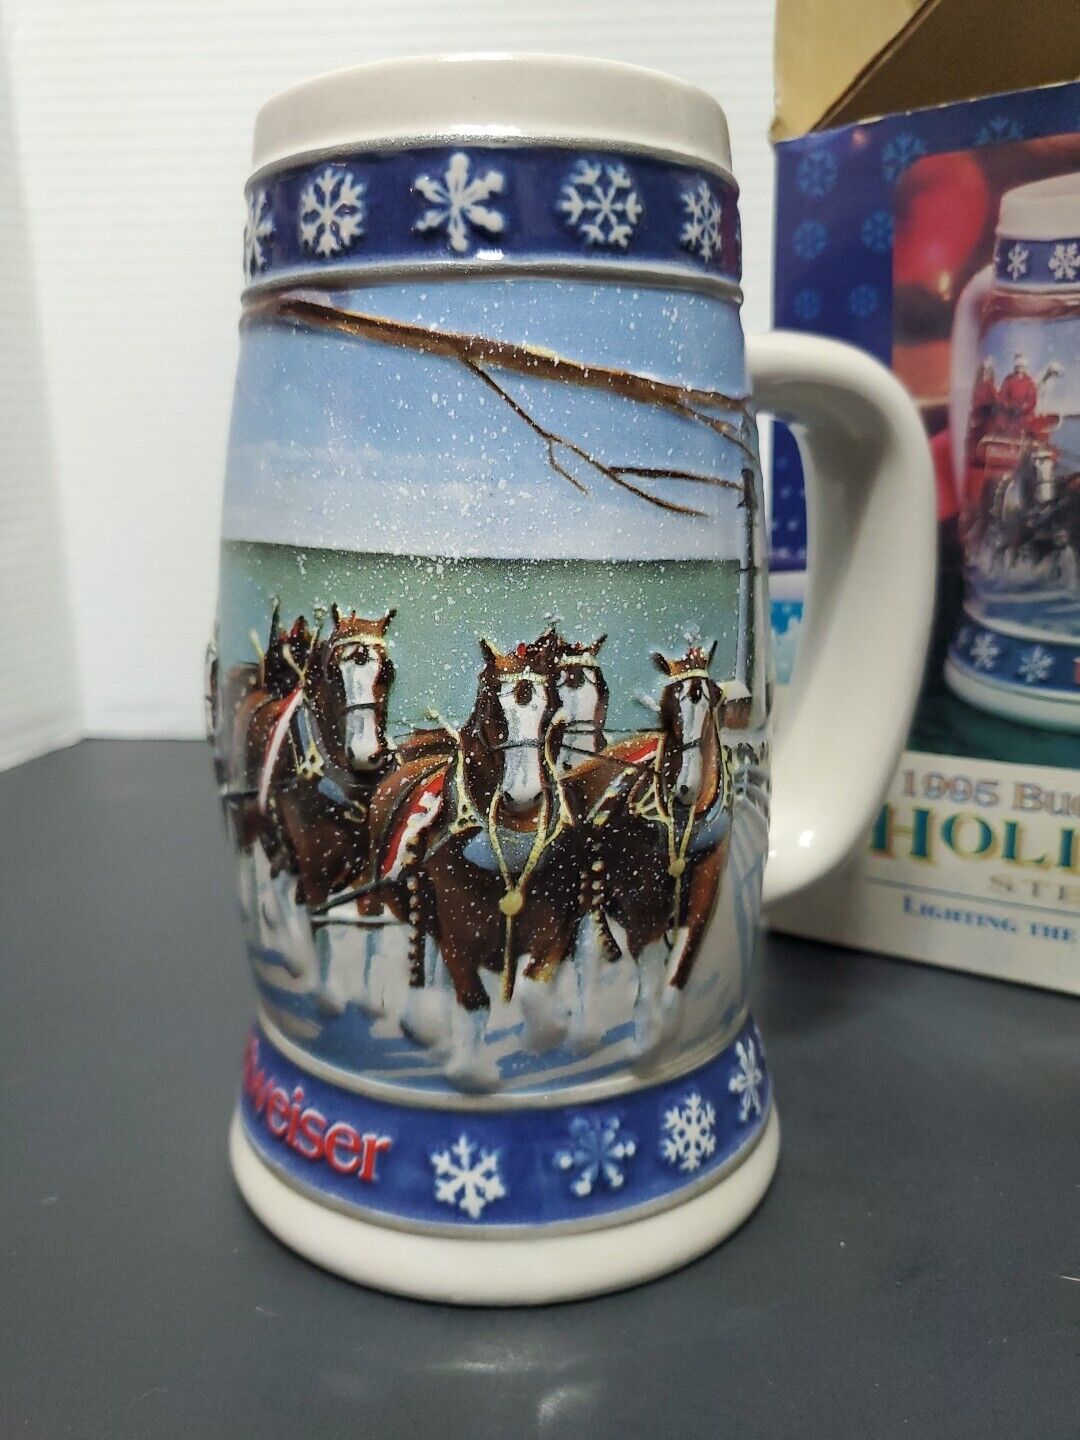 Vintage 1995 Budweiser Holiday Stein “Lighting The Way Home”  